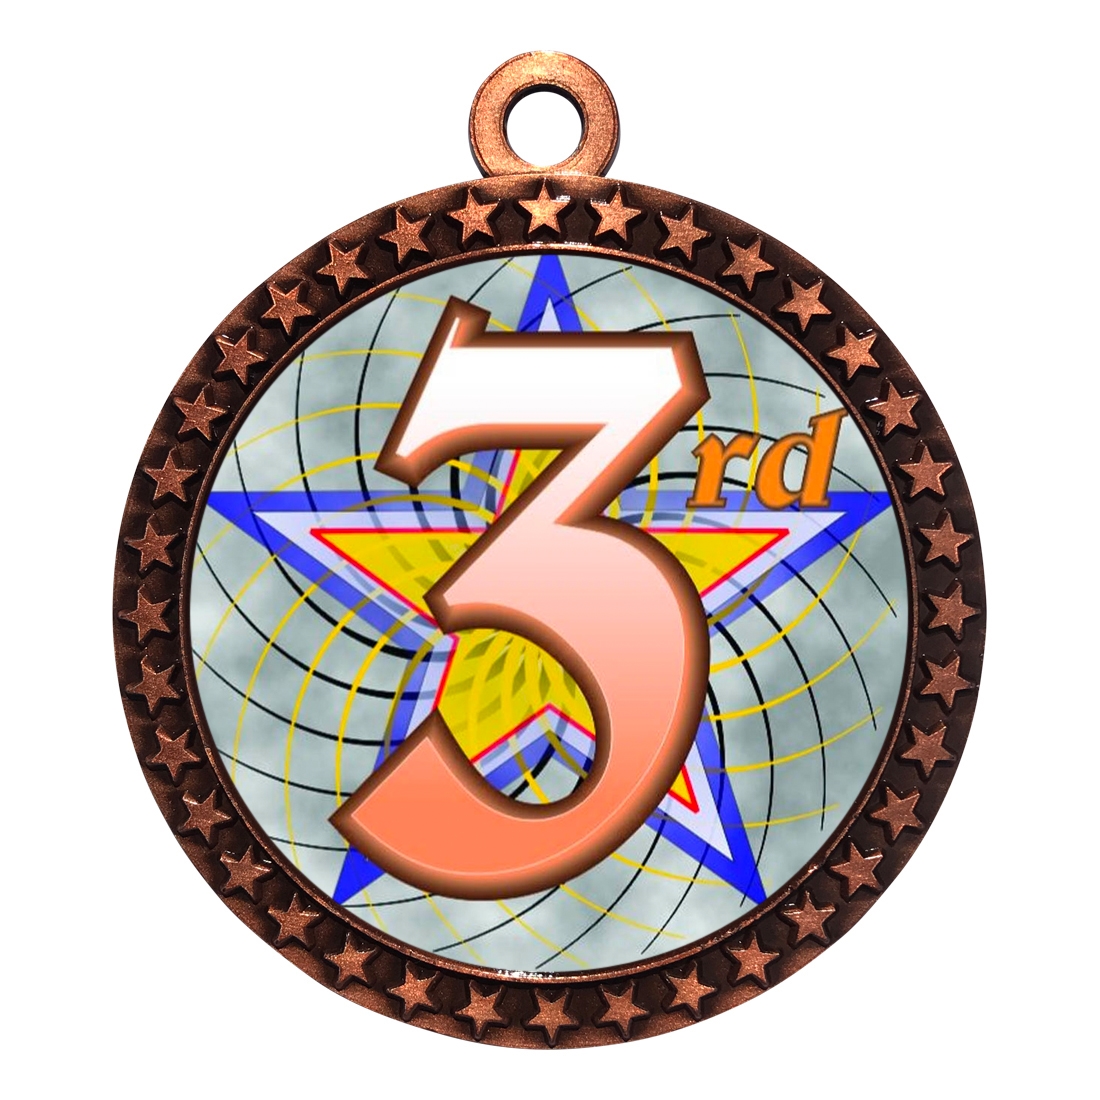 2-1/2" 3rd Place Medal